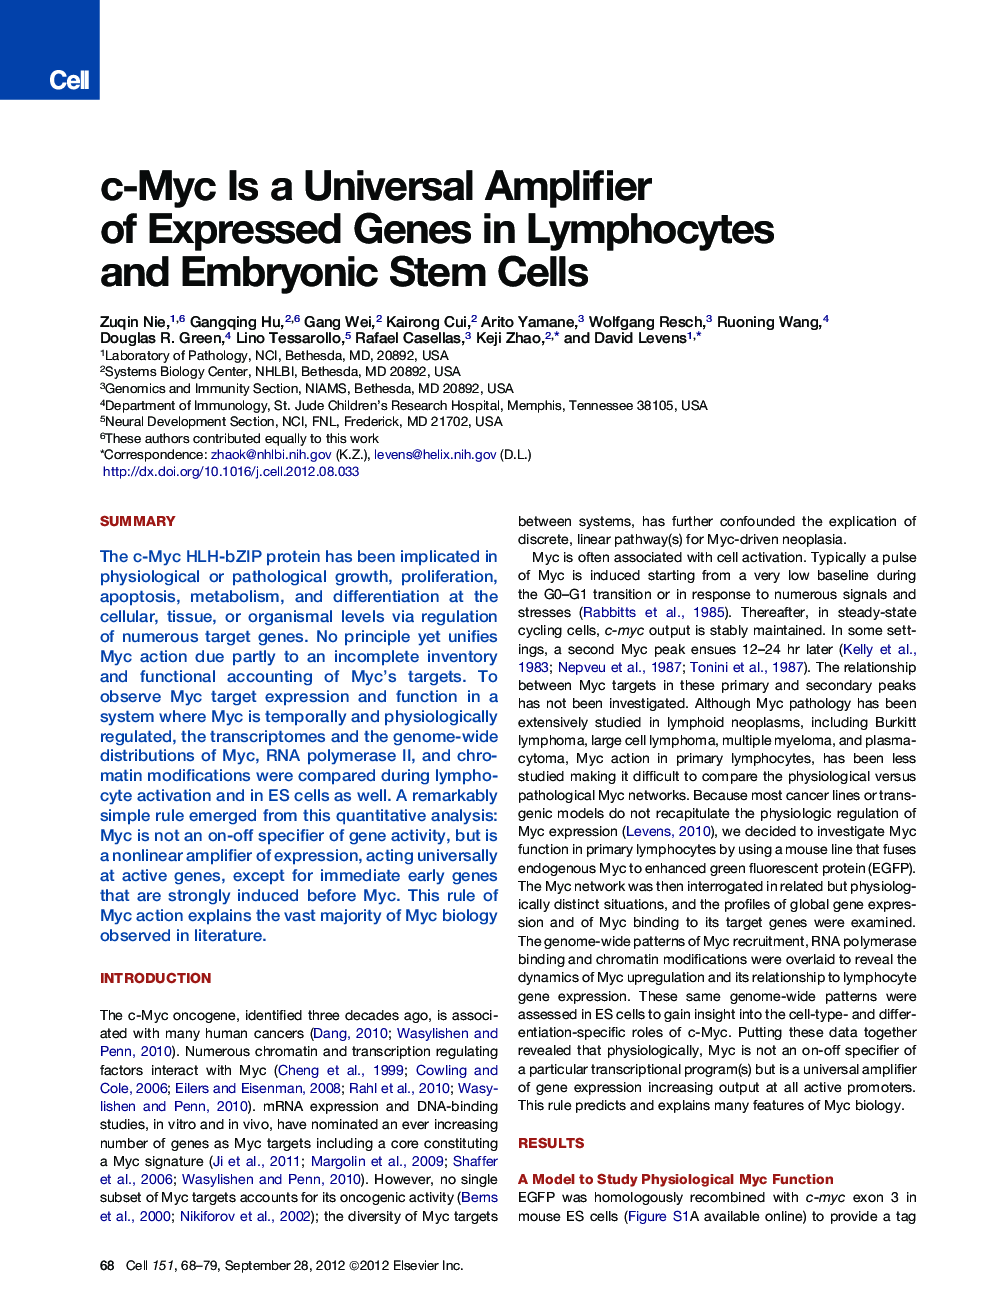 c-Myc Is a Universal Amplifier of Expressed Genes in Lymphocytes and Embryonic Stem Cells